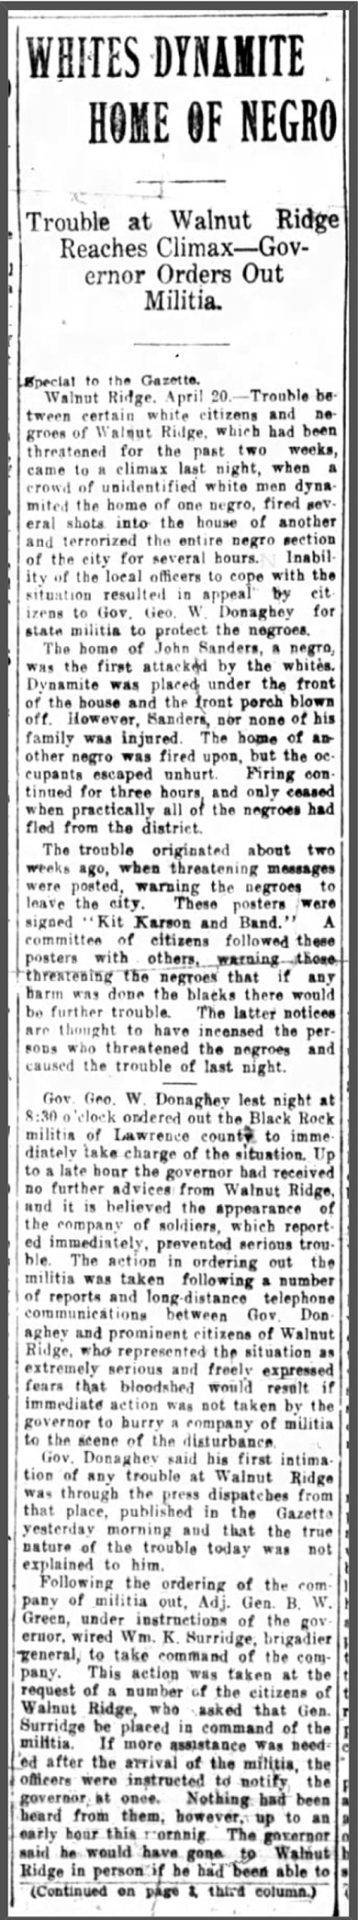 "Whites dynamite home of Negro" newspaper clipping